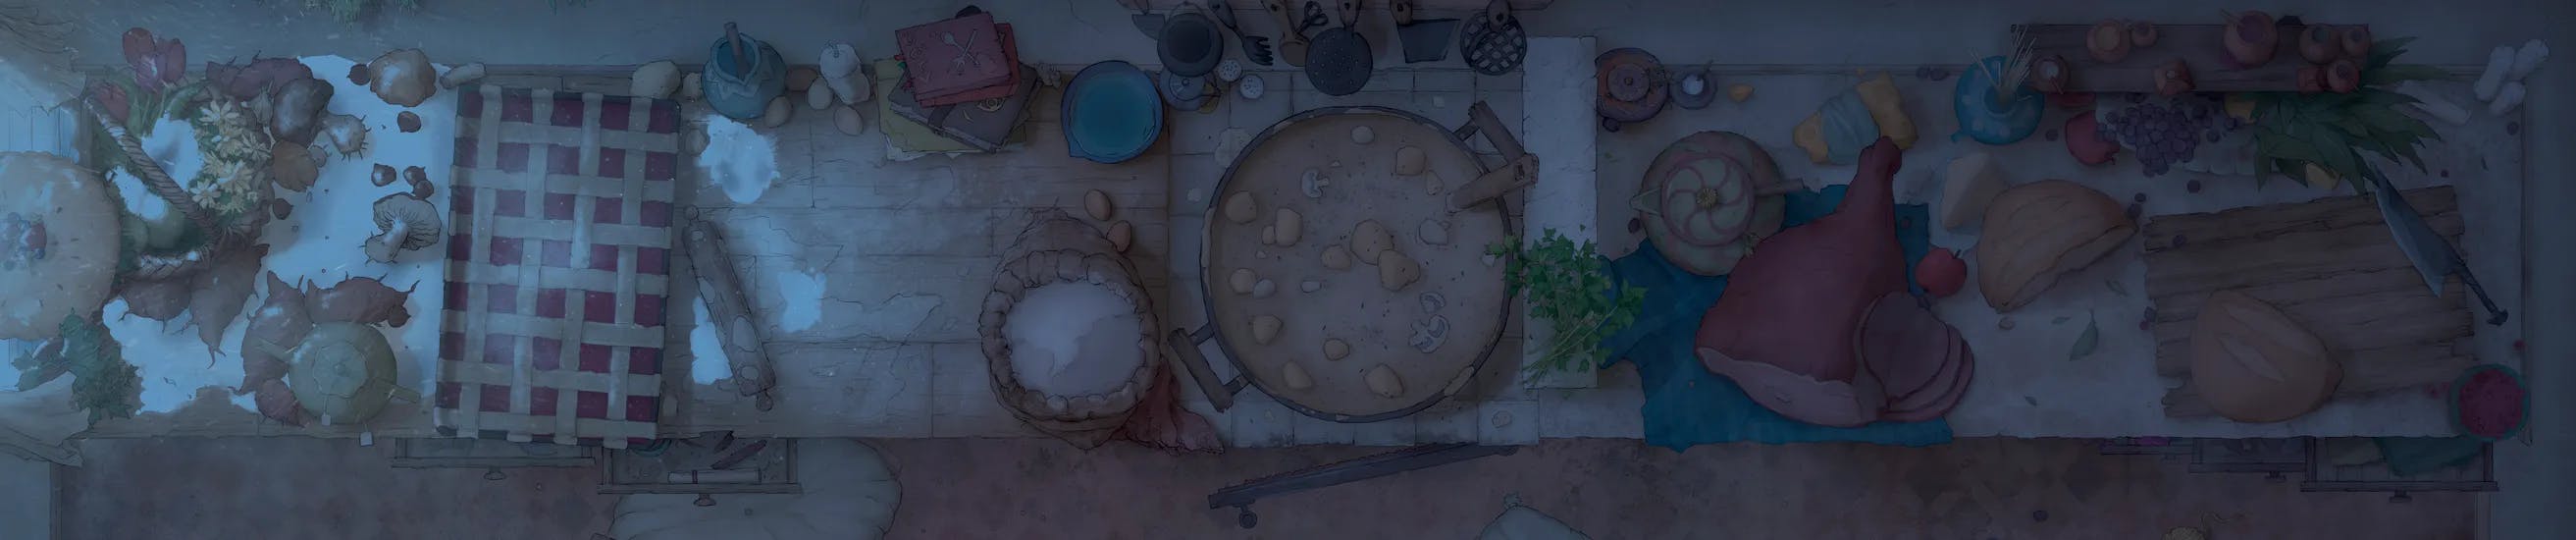 Giant Kitchen map, Snowstorm variant